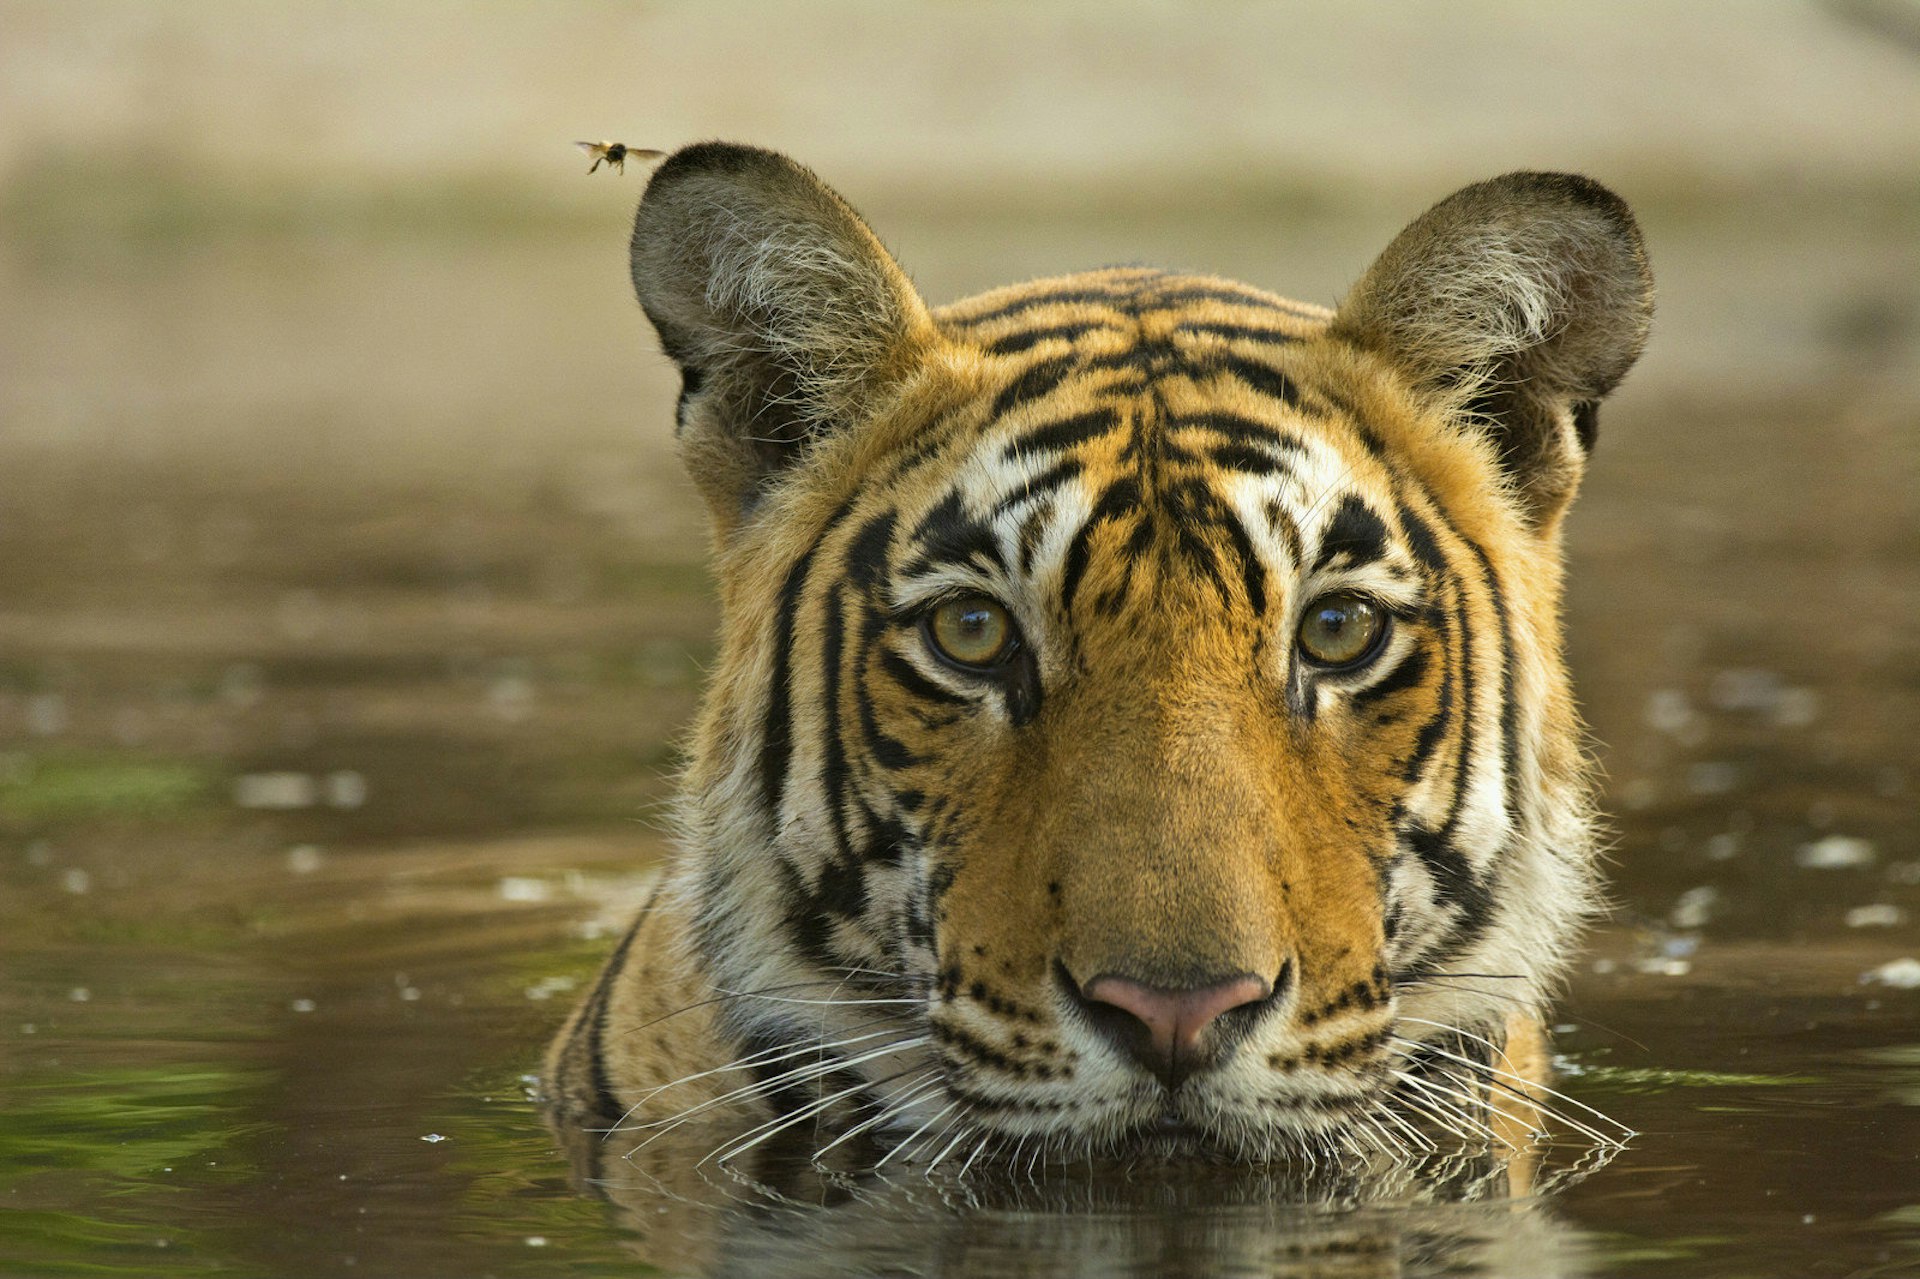 Shere Khan, is that you? © dickysingh / Getty Images